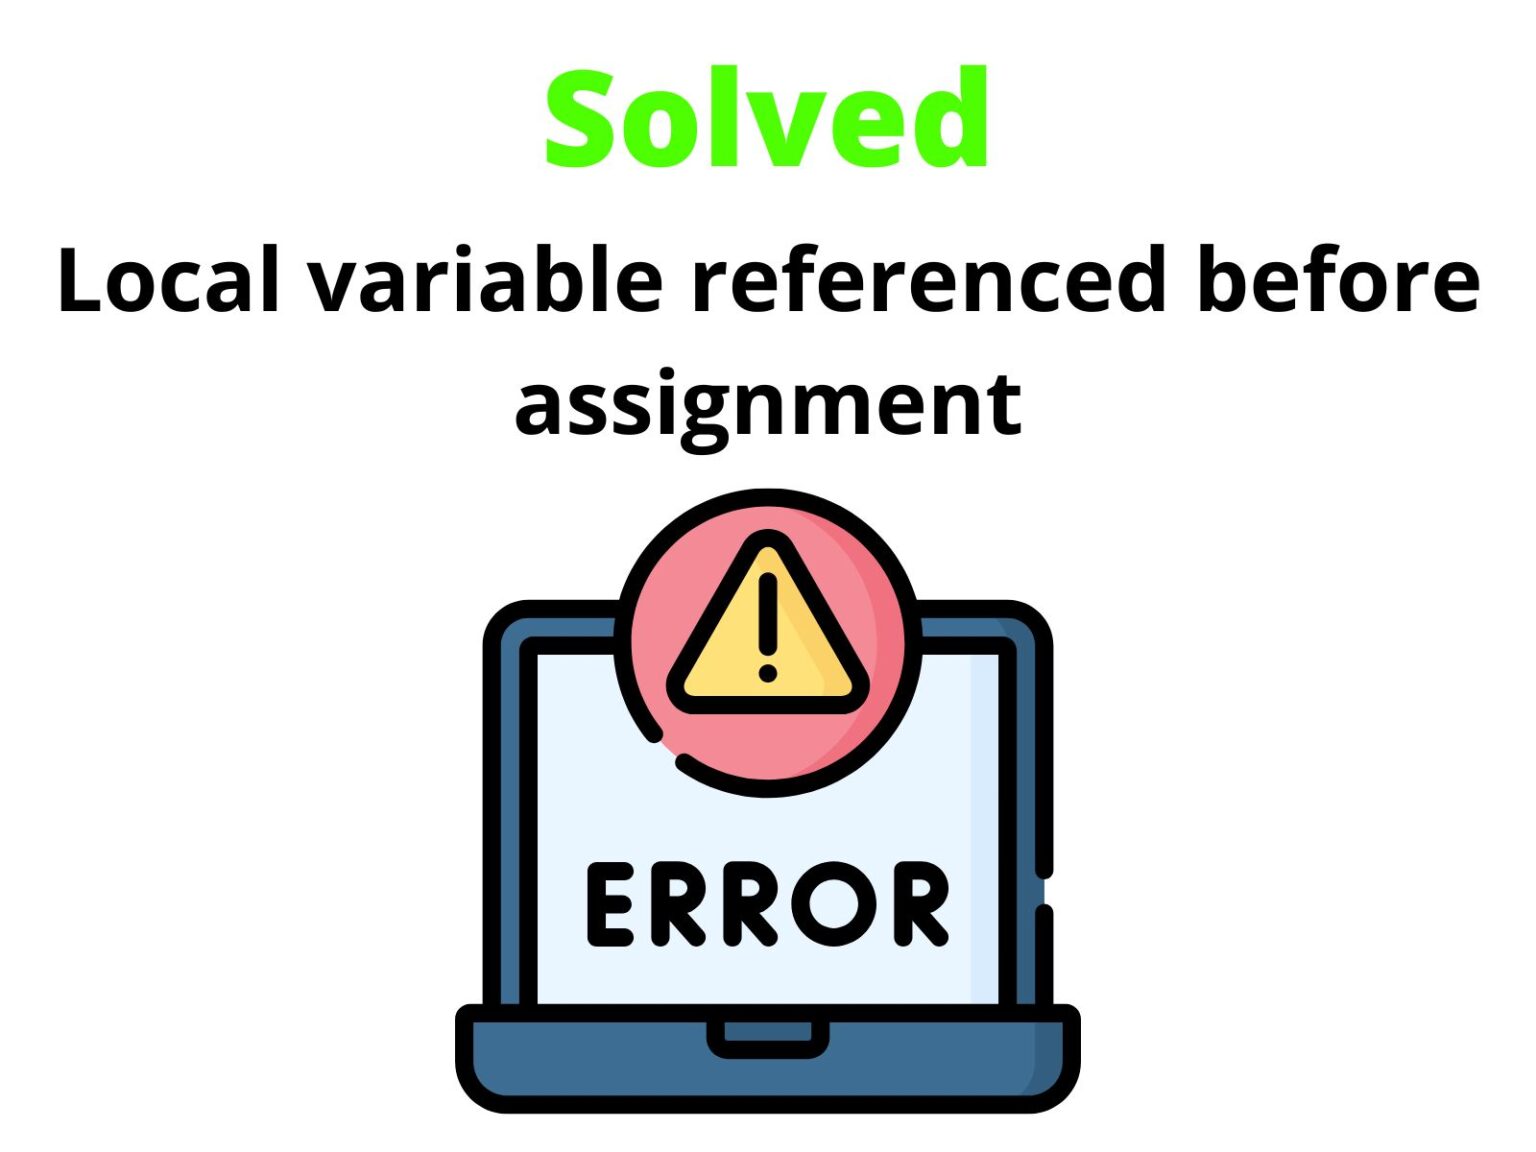 local variable 'resp' referenced before assignment